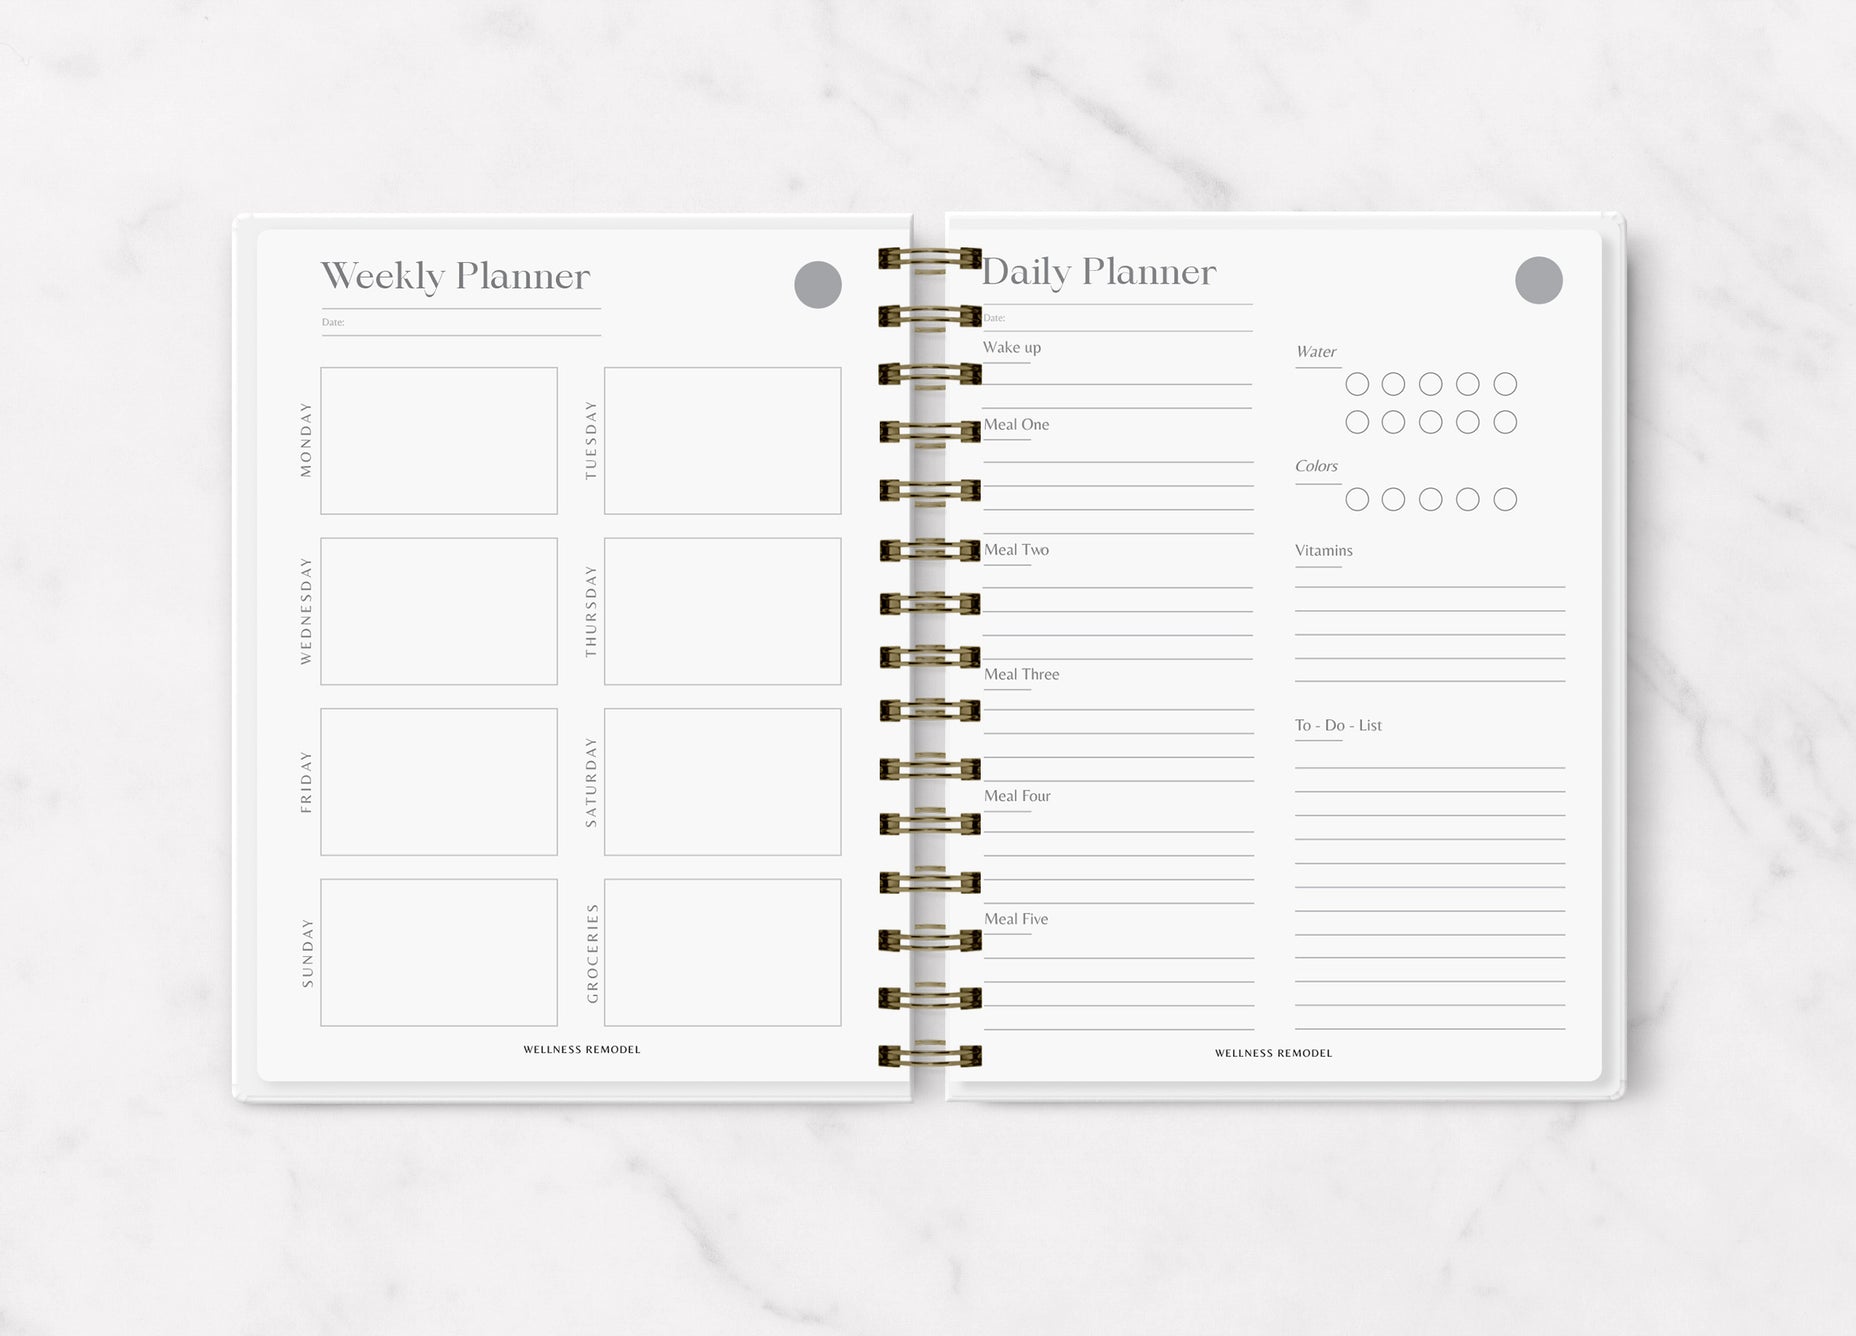 WELLNESS REMODEL DAILY PLANNER